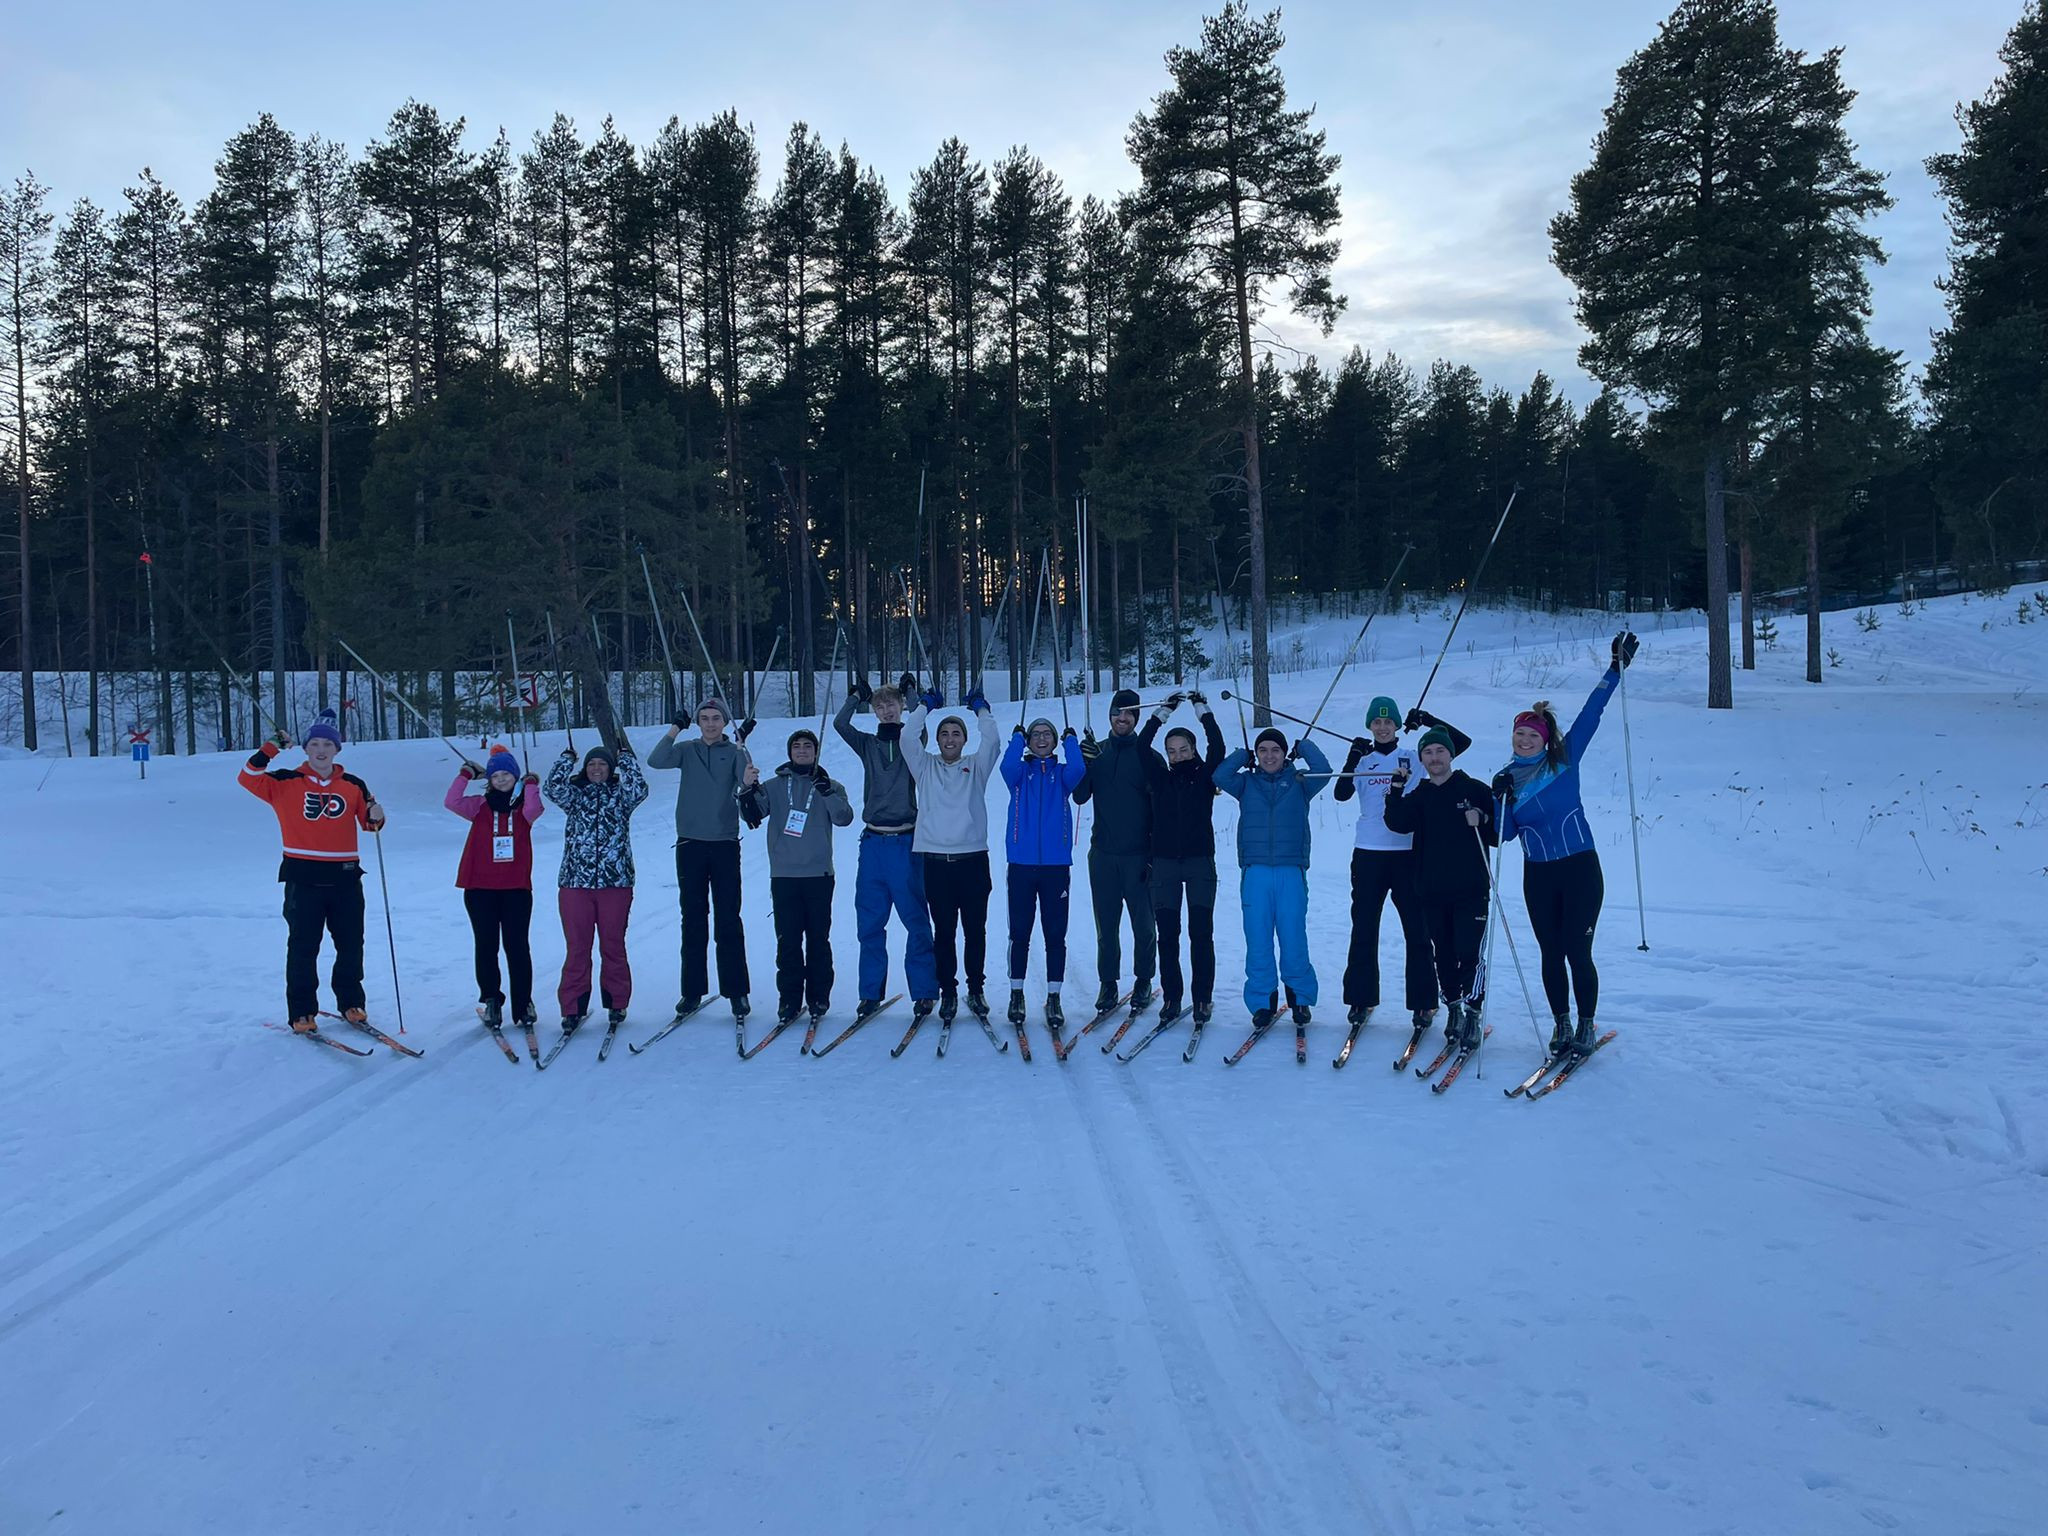 The Erasmus+ programme aims to promote the social inclusion of young people, and as well as their work in the camps, participants have engaged in cross-country skiing among other activities ©EYOF 2022 Vuokatti